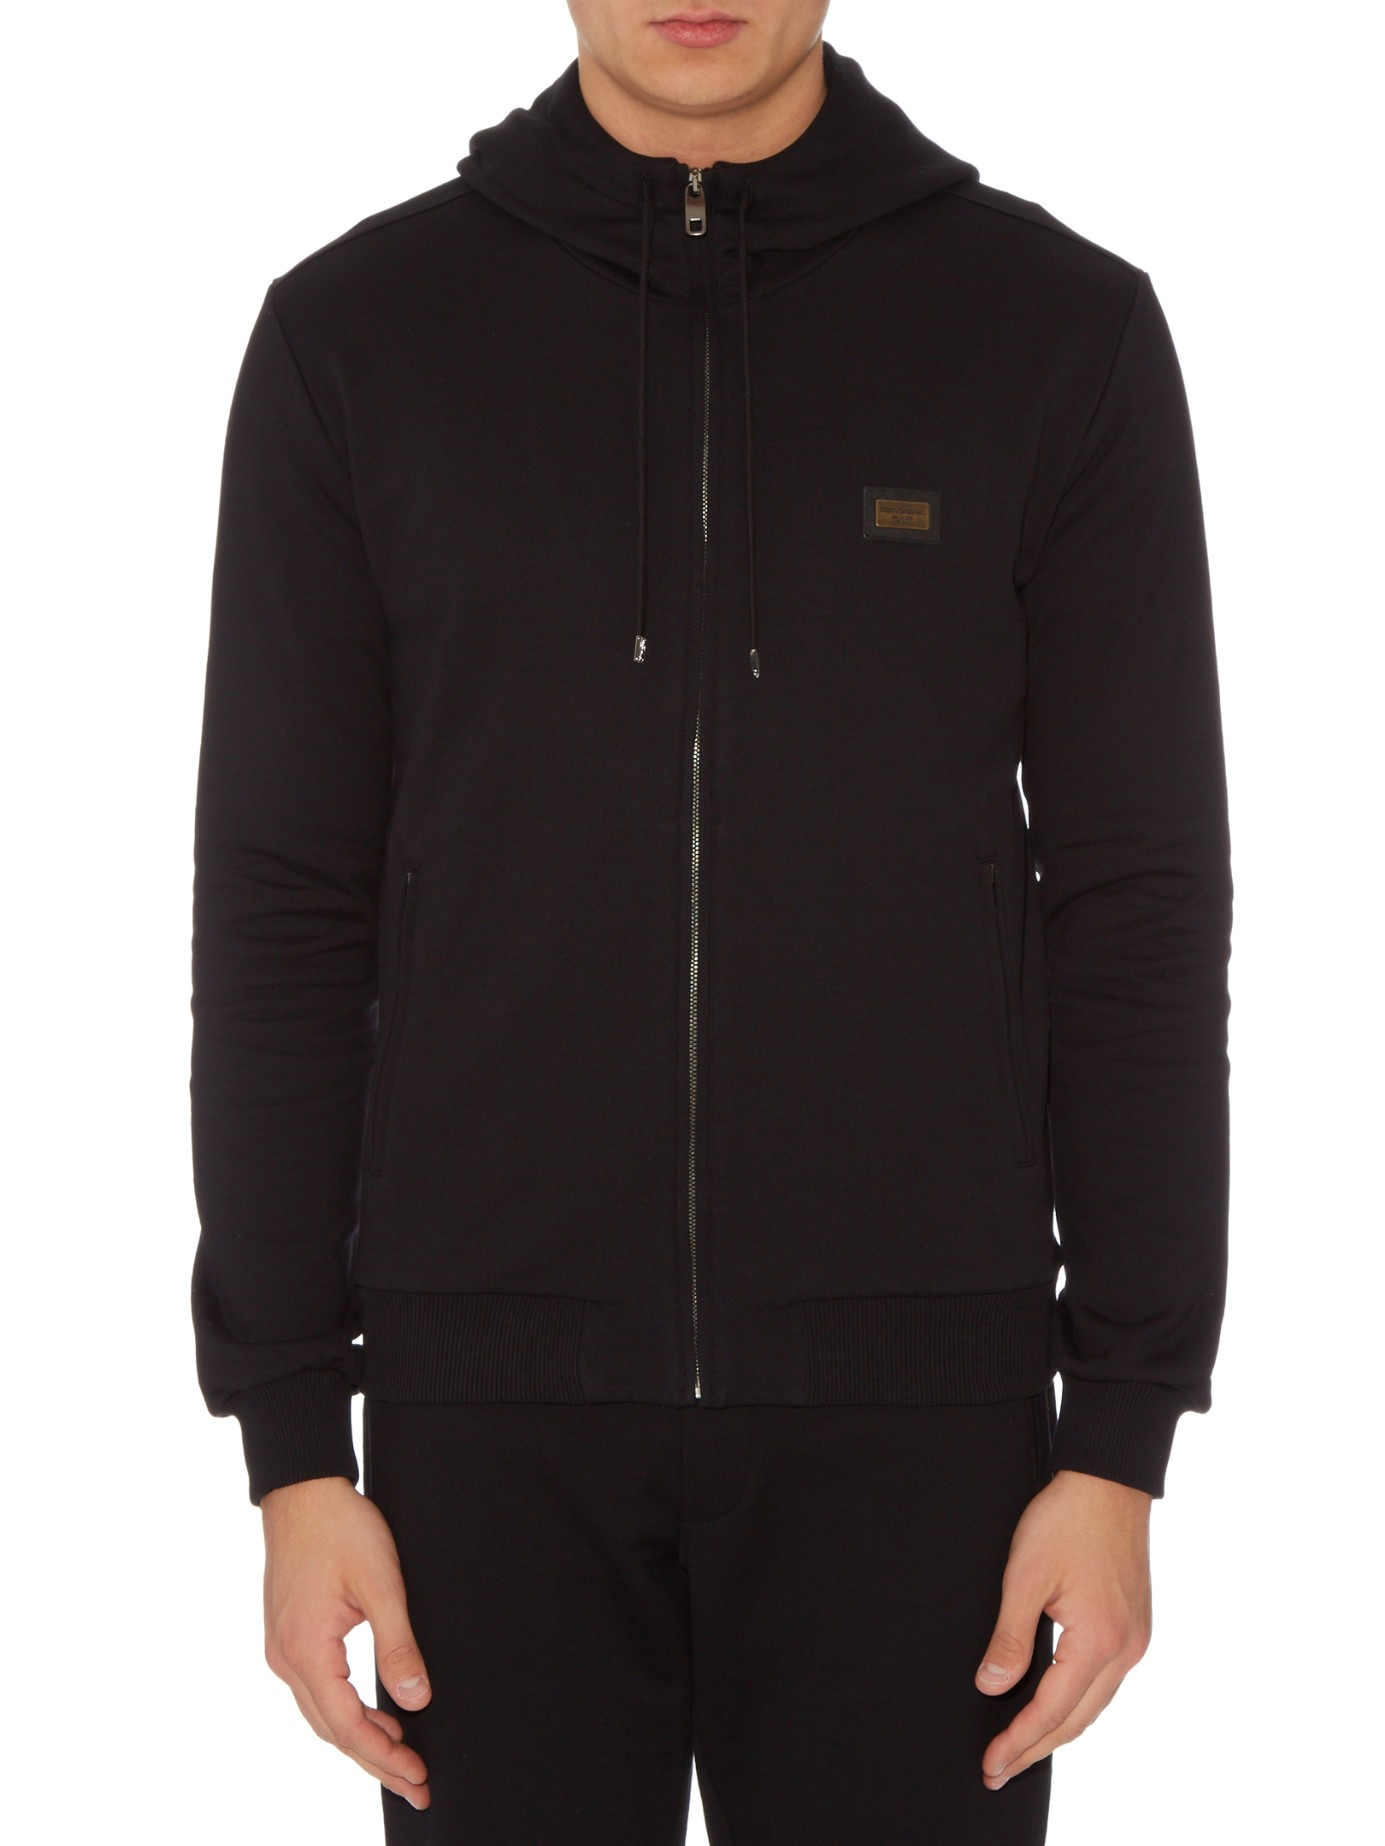 Lyst - Dolce & Gabbana Zip-up Hooded Cotton-jersey Sweater in Black for Men